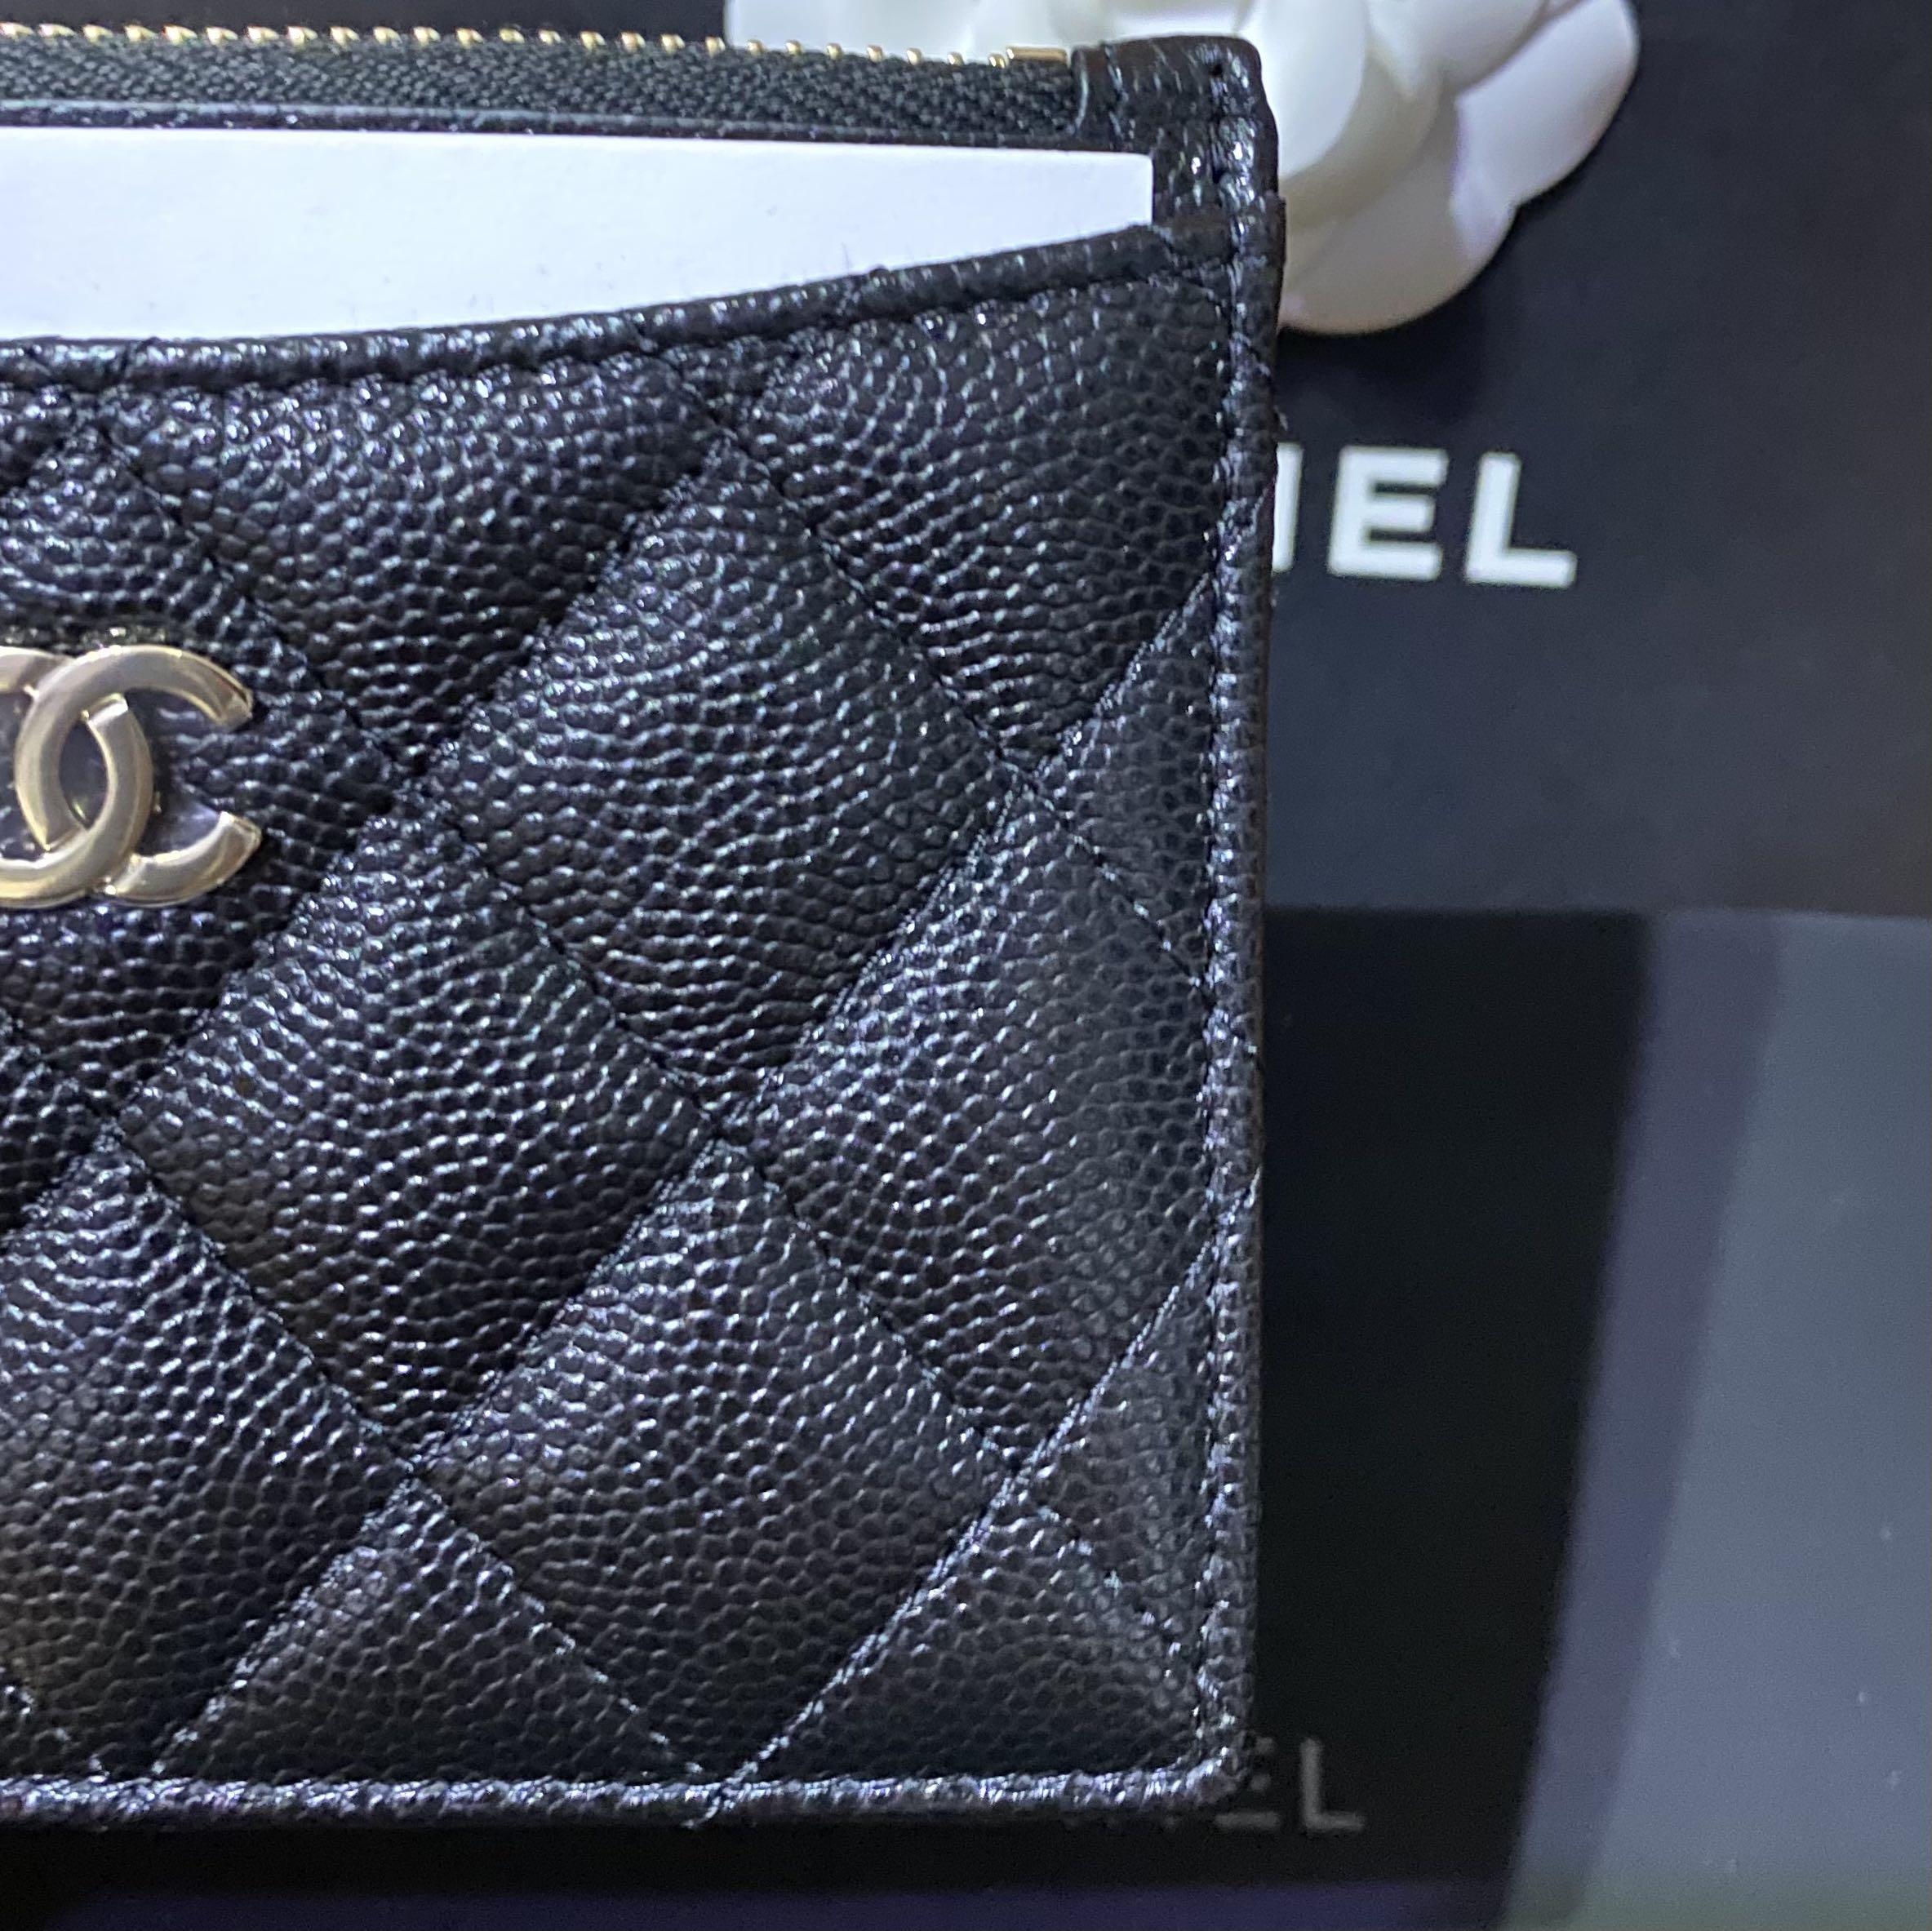 Chanel Zipped Card Holder